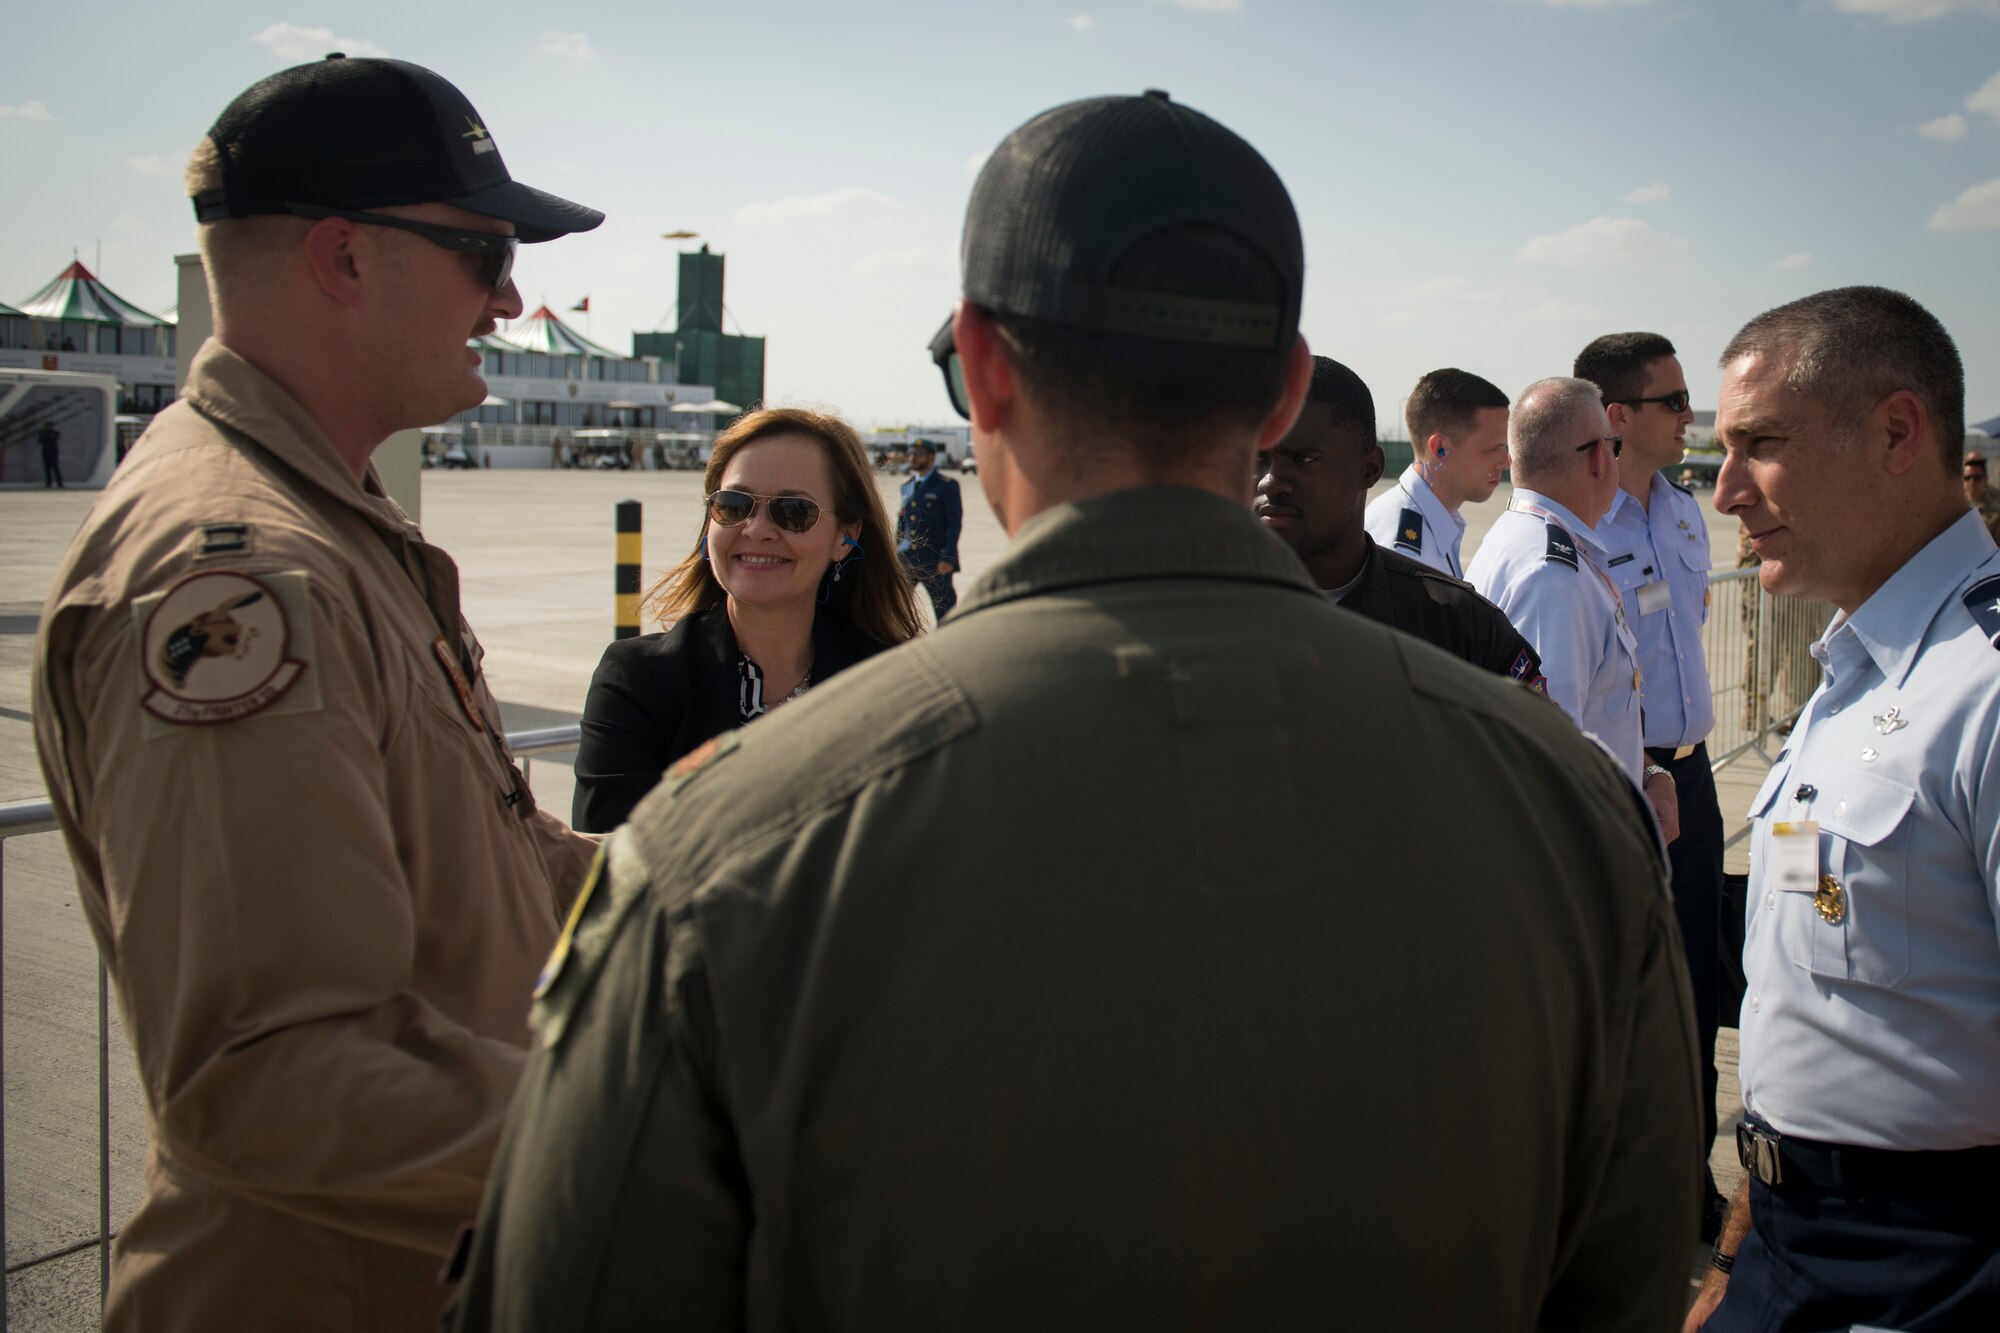 Kelli Seybolt, second from left, the Deputy Under Secretary of the Air Force, International Affairs, discusses F-22 Raptor capabilities with U.S. Air Force Capt. Keenan Bell, an F-22 Raptor pilot with the 27th Fighter Squadron at Joint Base Langley-Eustis, Va., as part of the Dubai Airshow, United Arab Emirates, on Nov. 18, 2019.